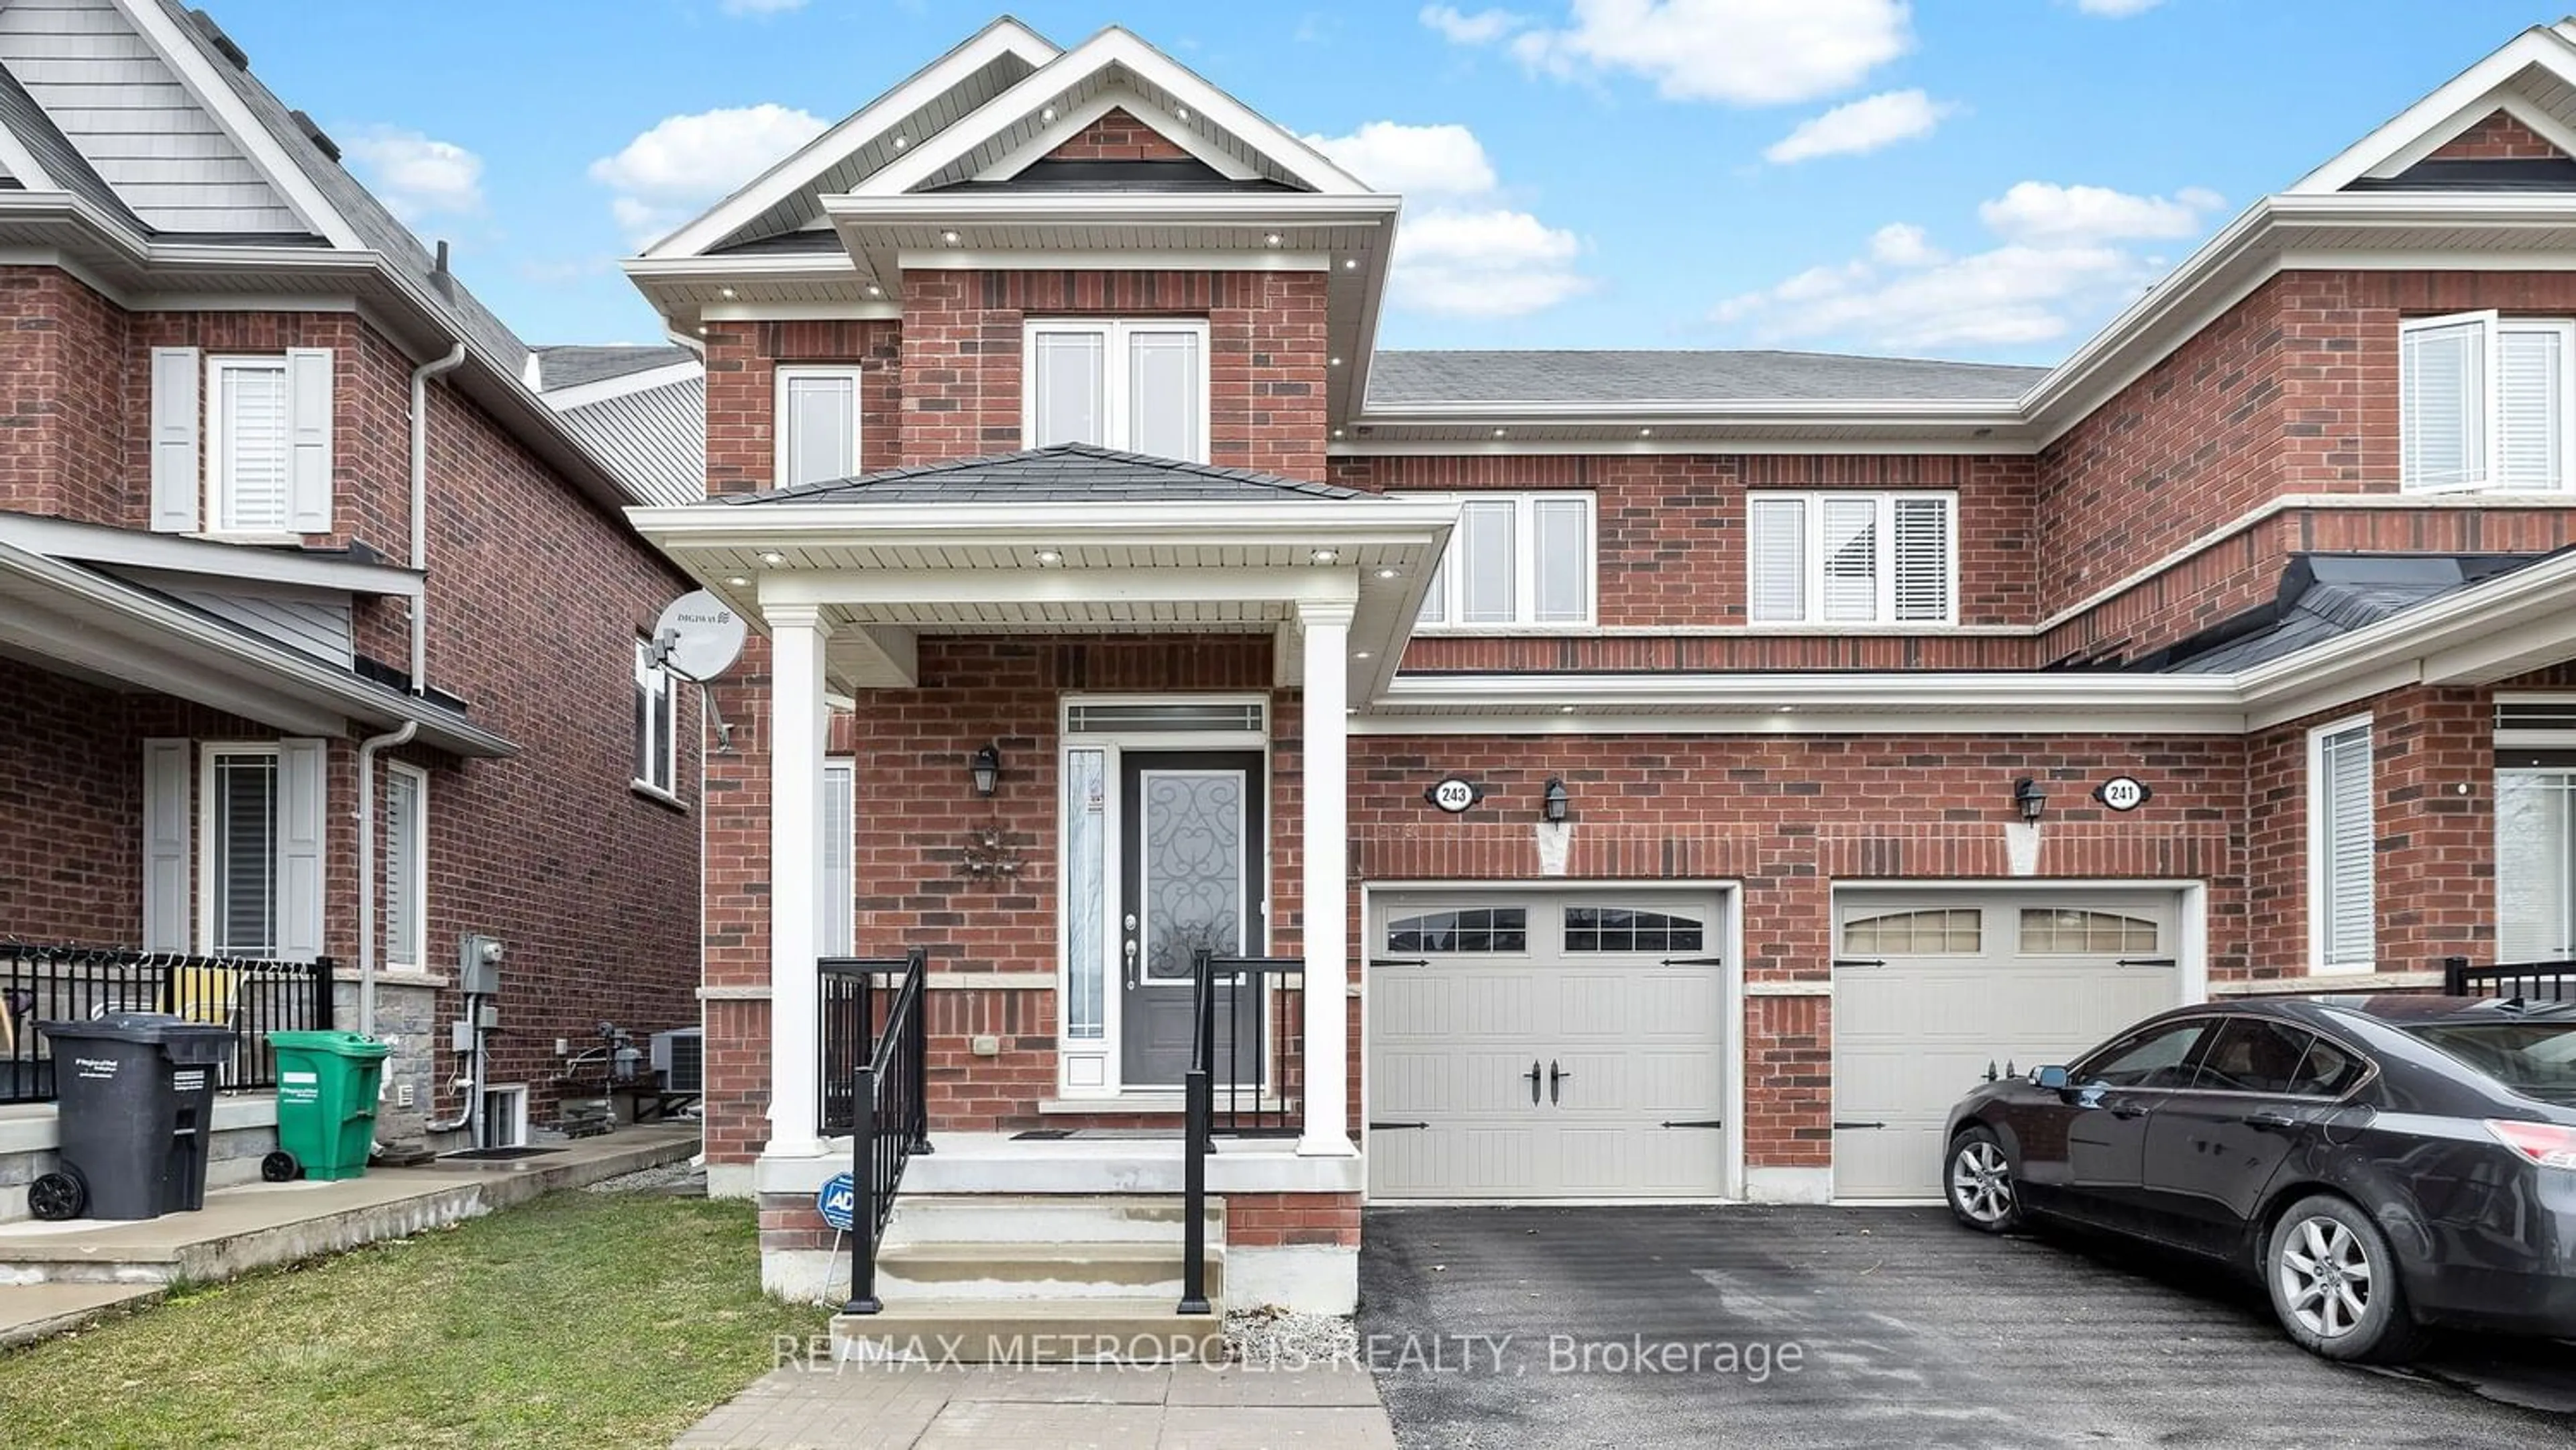 Home with brick exterior material for 243 Robert Parkinson Dr, Brampton Ontario L7A 3Y1